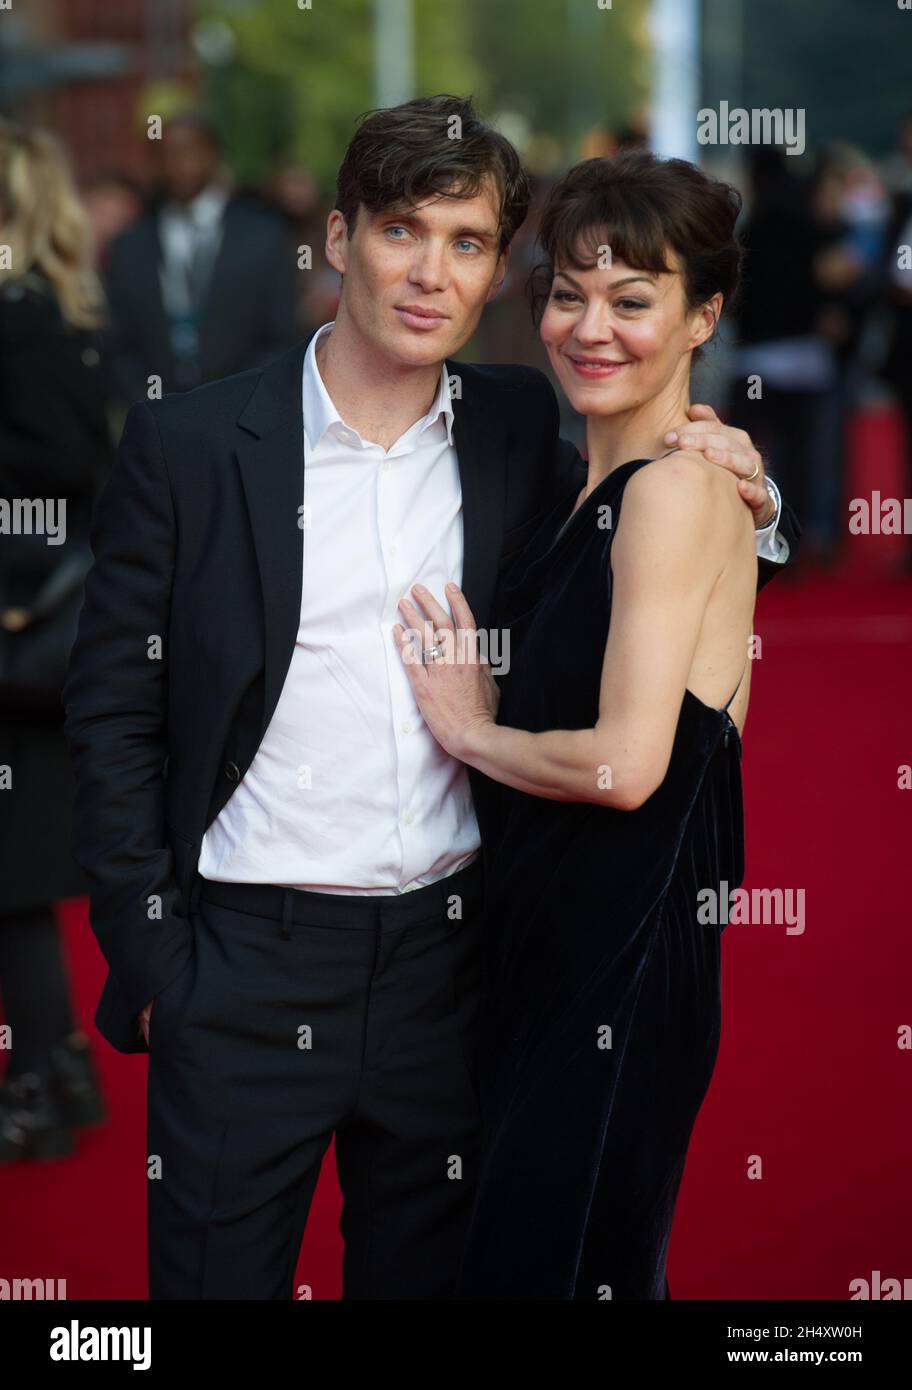 Cillian Murphy and Helen McCrory attending the world premiere screening of the first episode of the new series Peaky Blinders at Cineworld Broad Street in Birmingham on Sunday 21st September Stock Photo